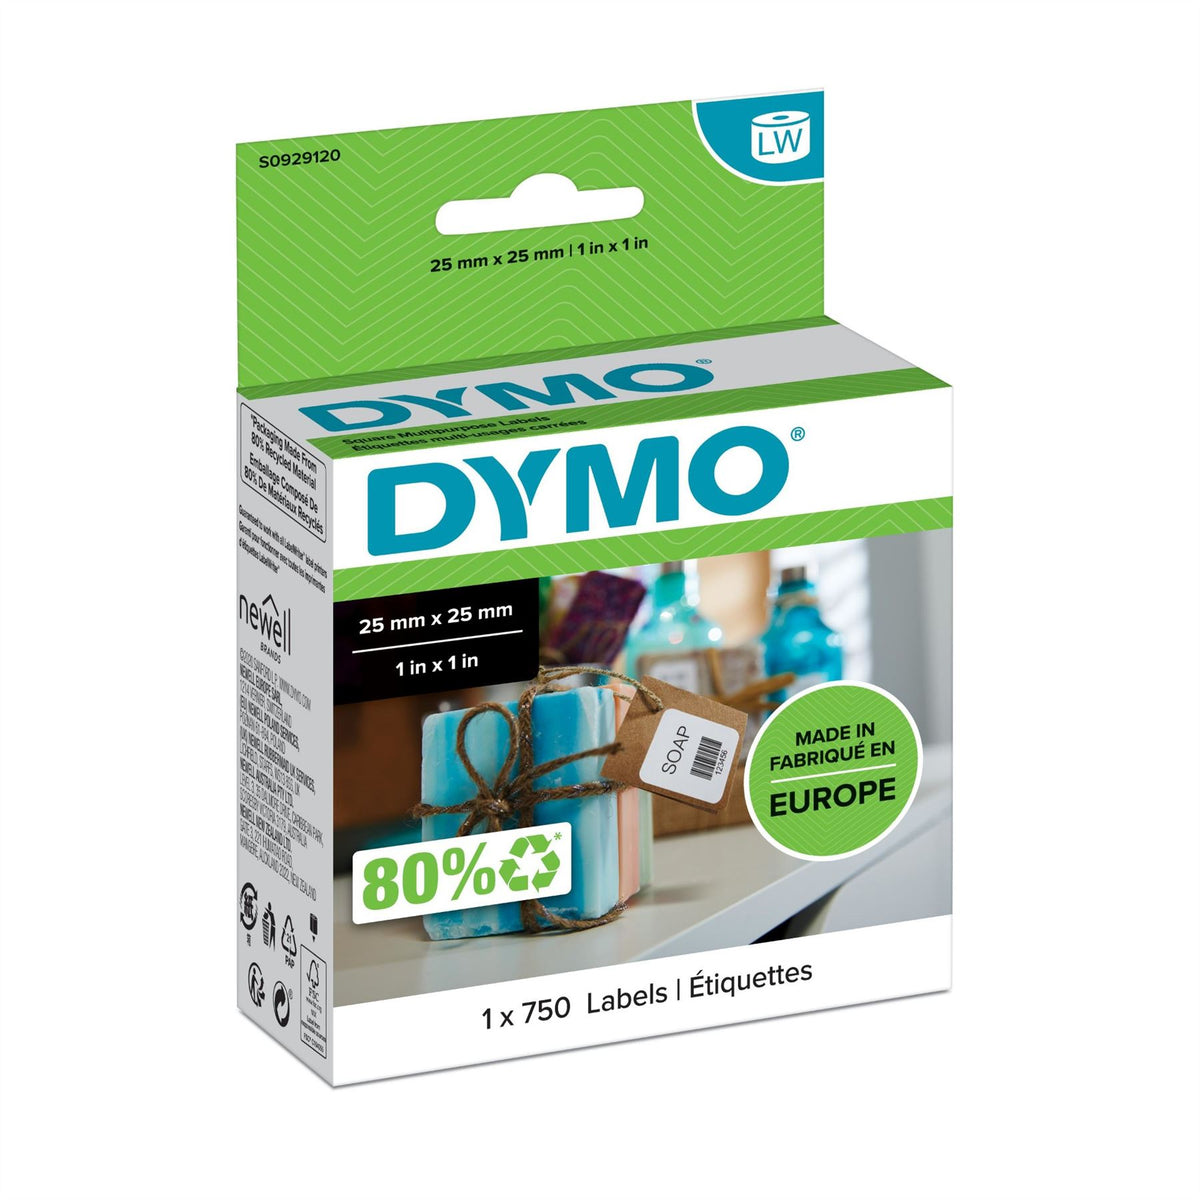 Dymo S0929120 DirectLabel-etikettes white 25mm x25 mm for Dymo LW 550 60mm/60mm